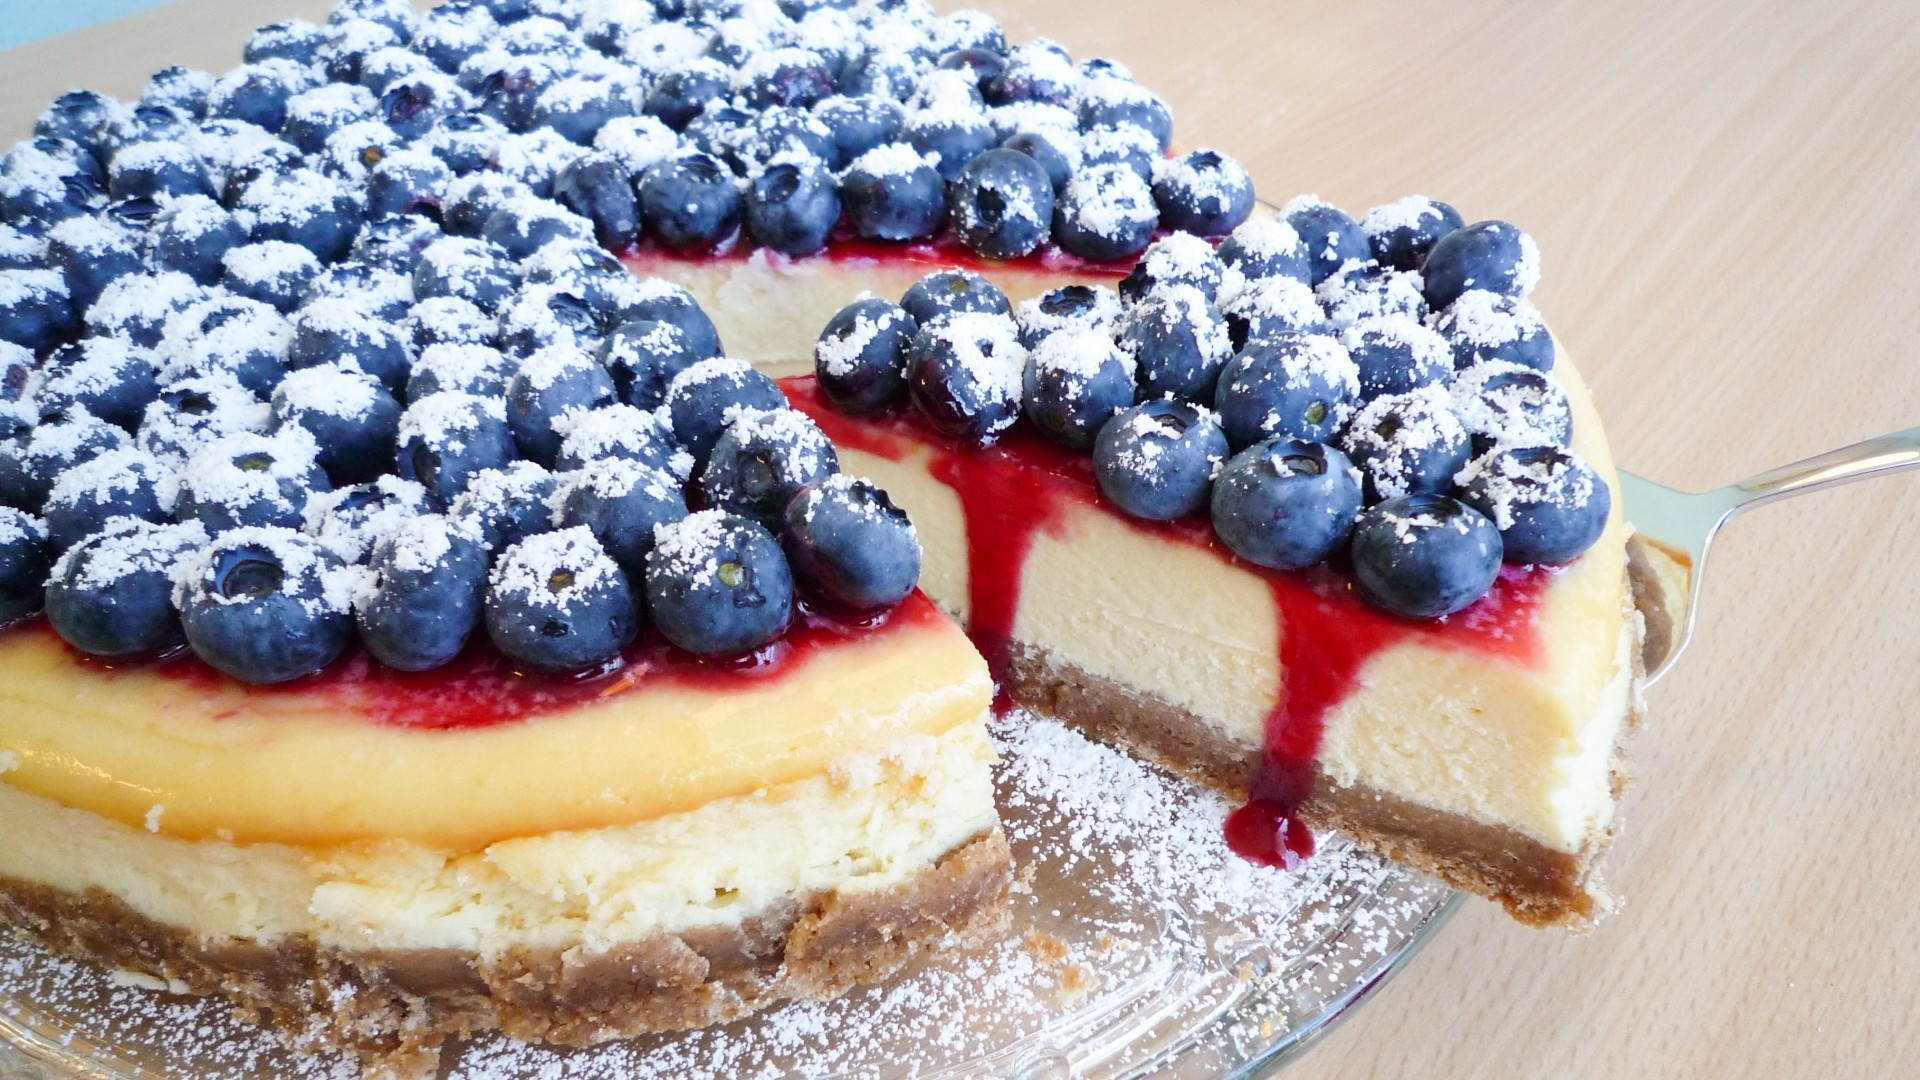 Cheesecake: Uses a cream cheese base, also incorporating heavy cream or sour cream. 1920x1080 Full HD Background.